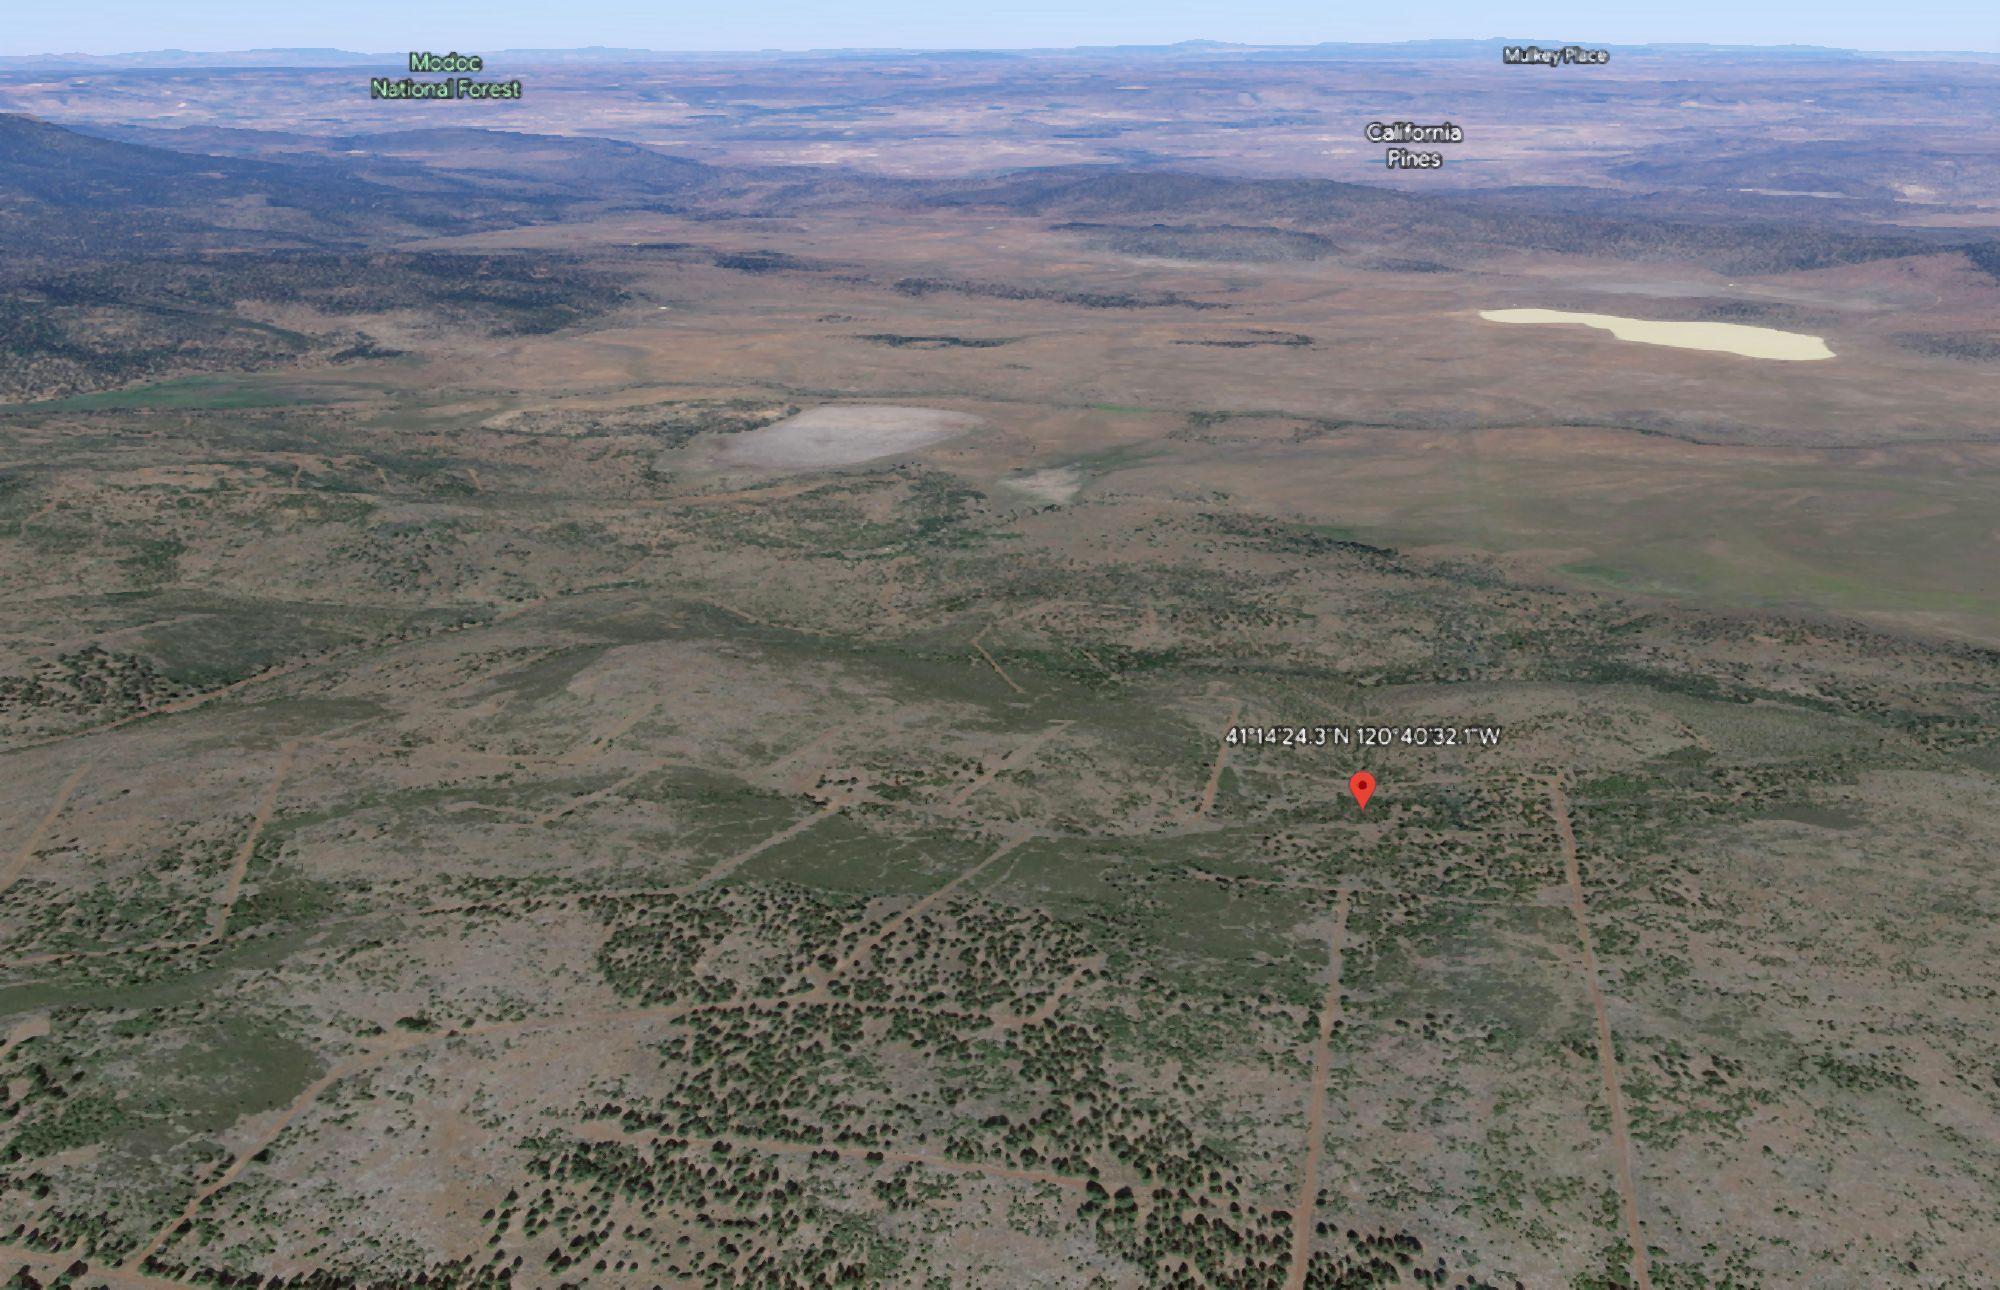 California Aprox 1 Acre Modoc County Great Recreational Land Investment with Low Monthly Payments!